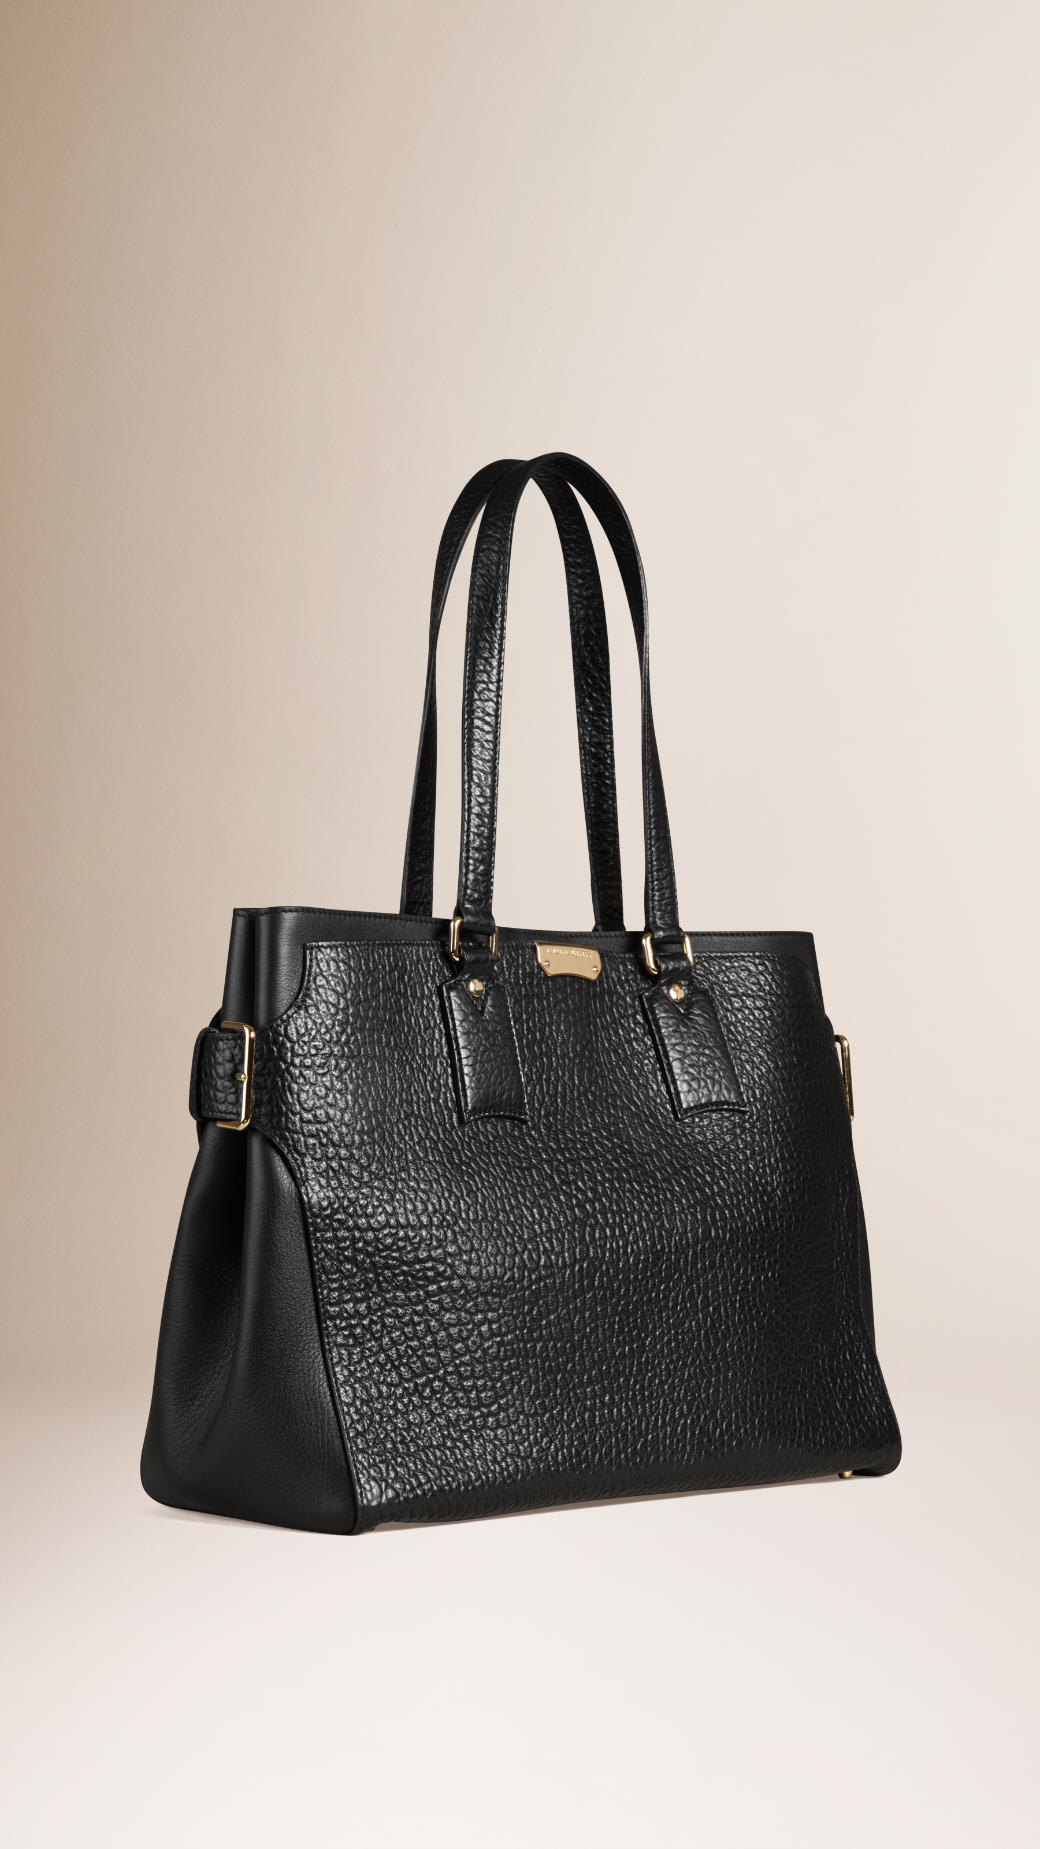 Burberry Large Signature Grained Leather Tote Bag in Black - Lyst